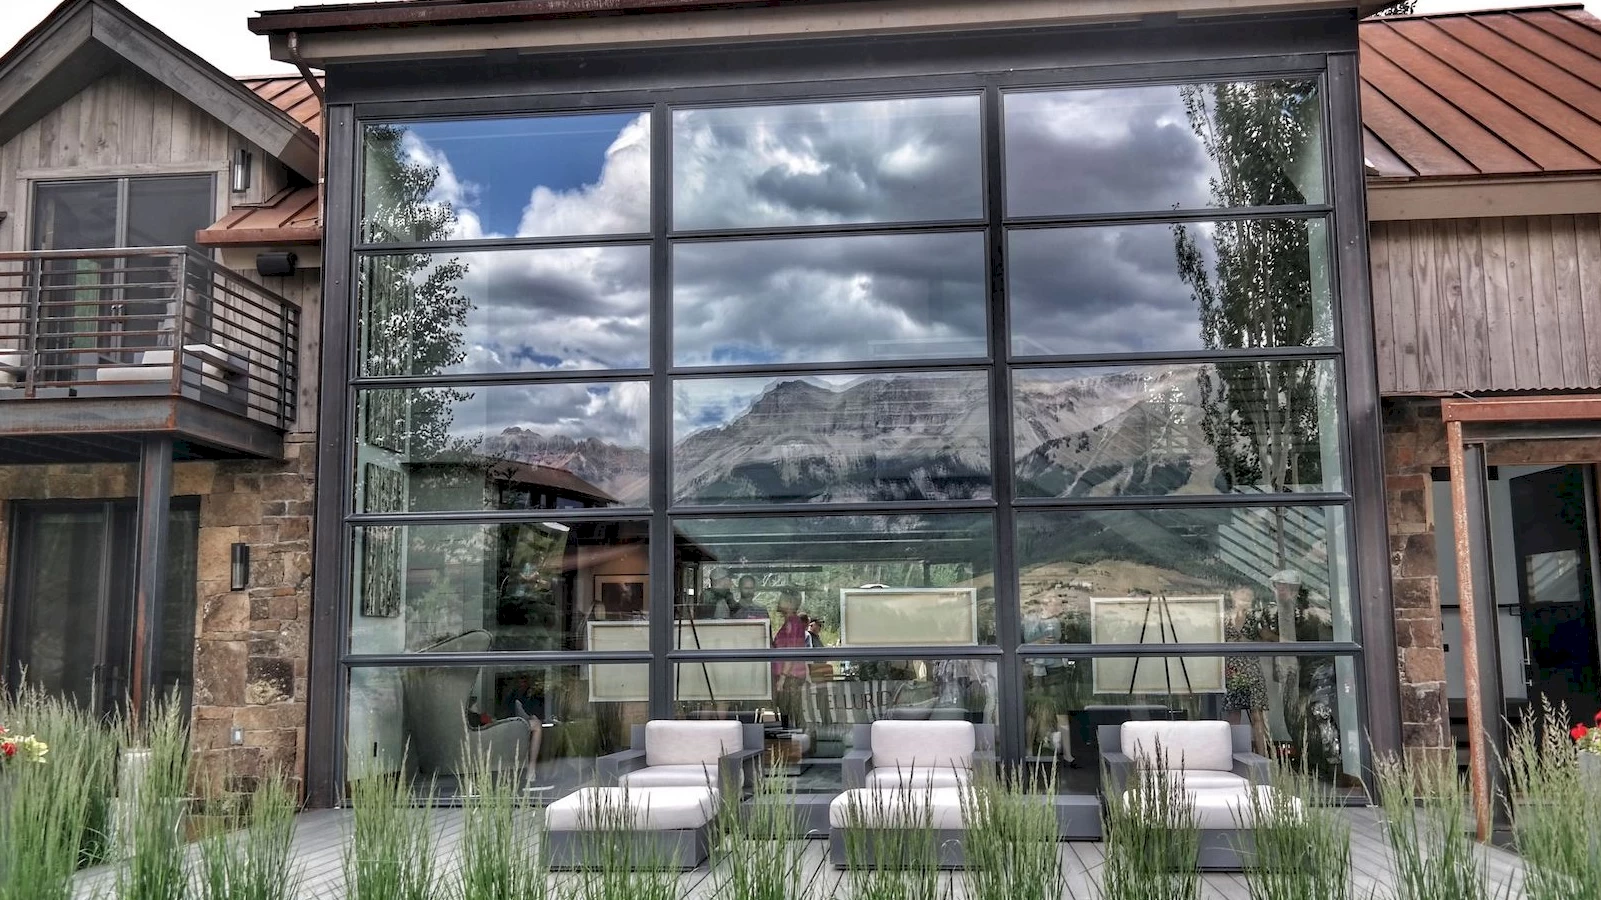 image of a building with lots of windows reflecting a mountain scene for the Telluride Art + Architecture Festival